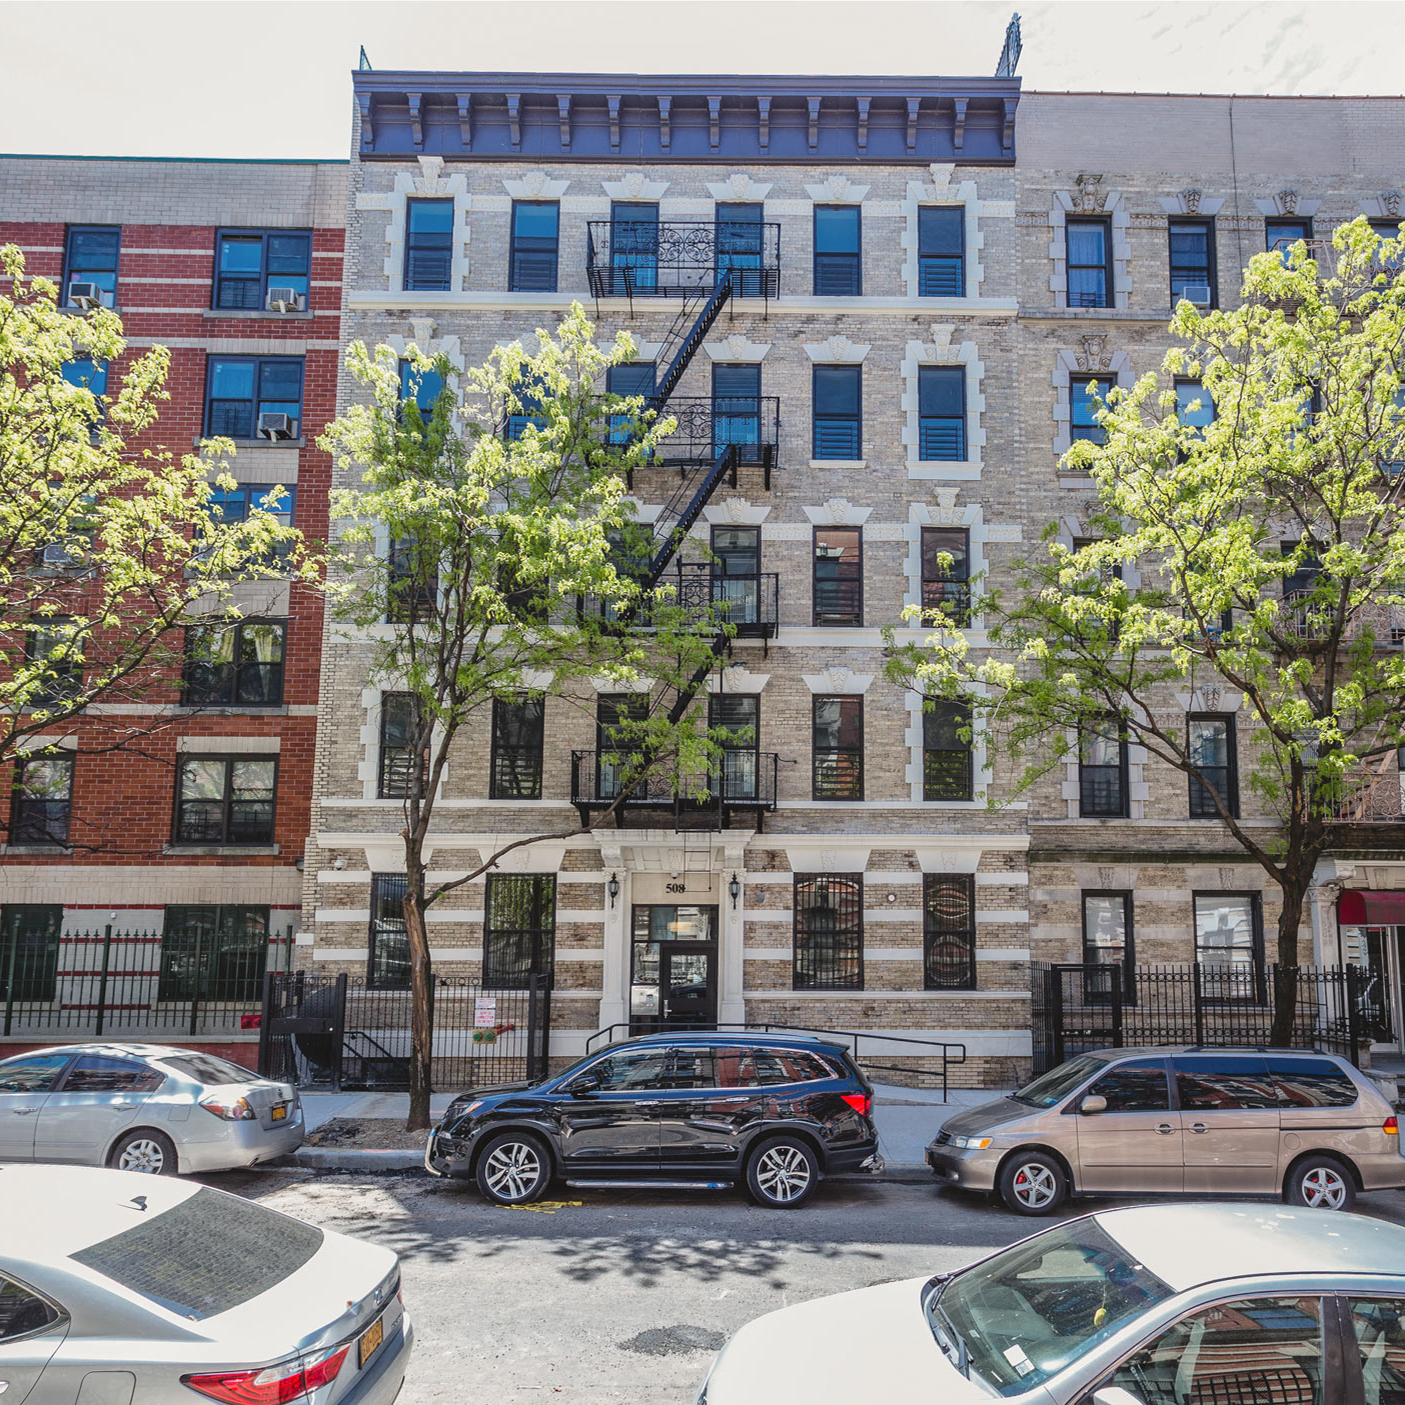 Image of 508 West 134th Street